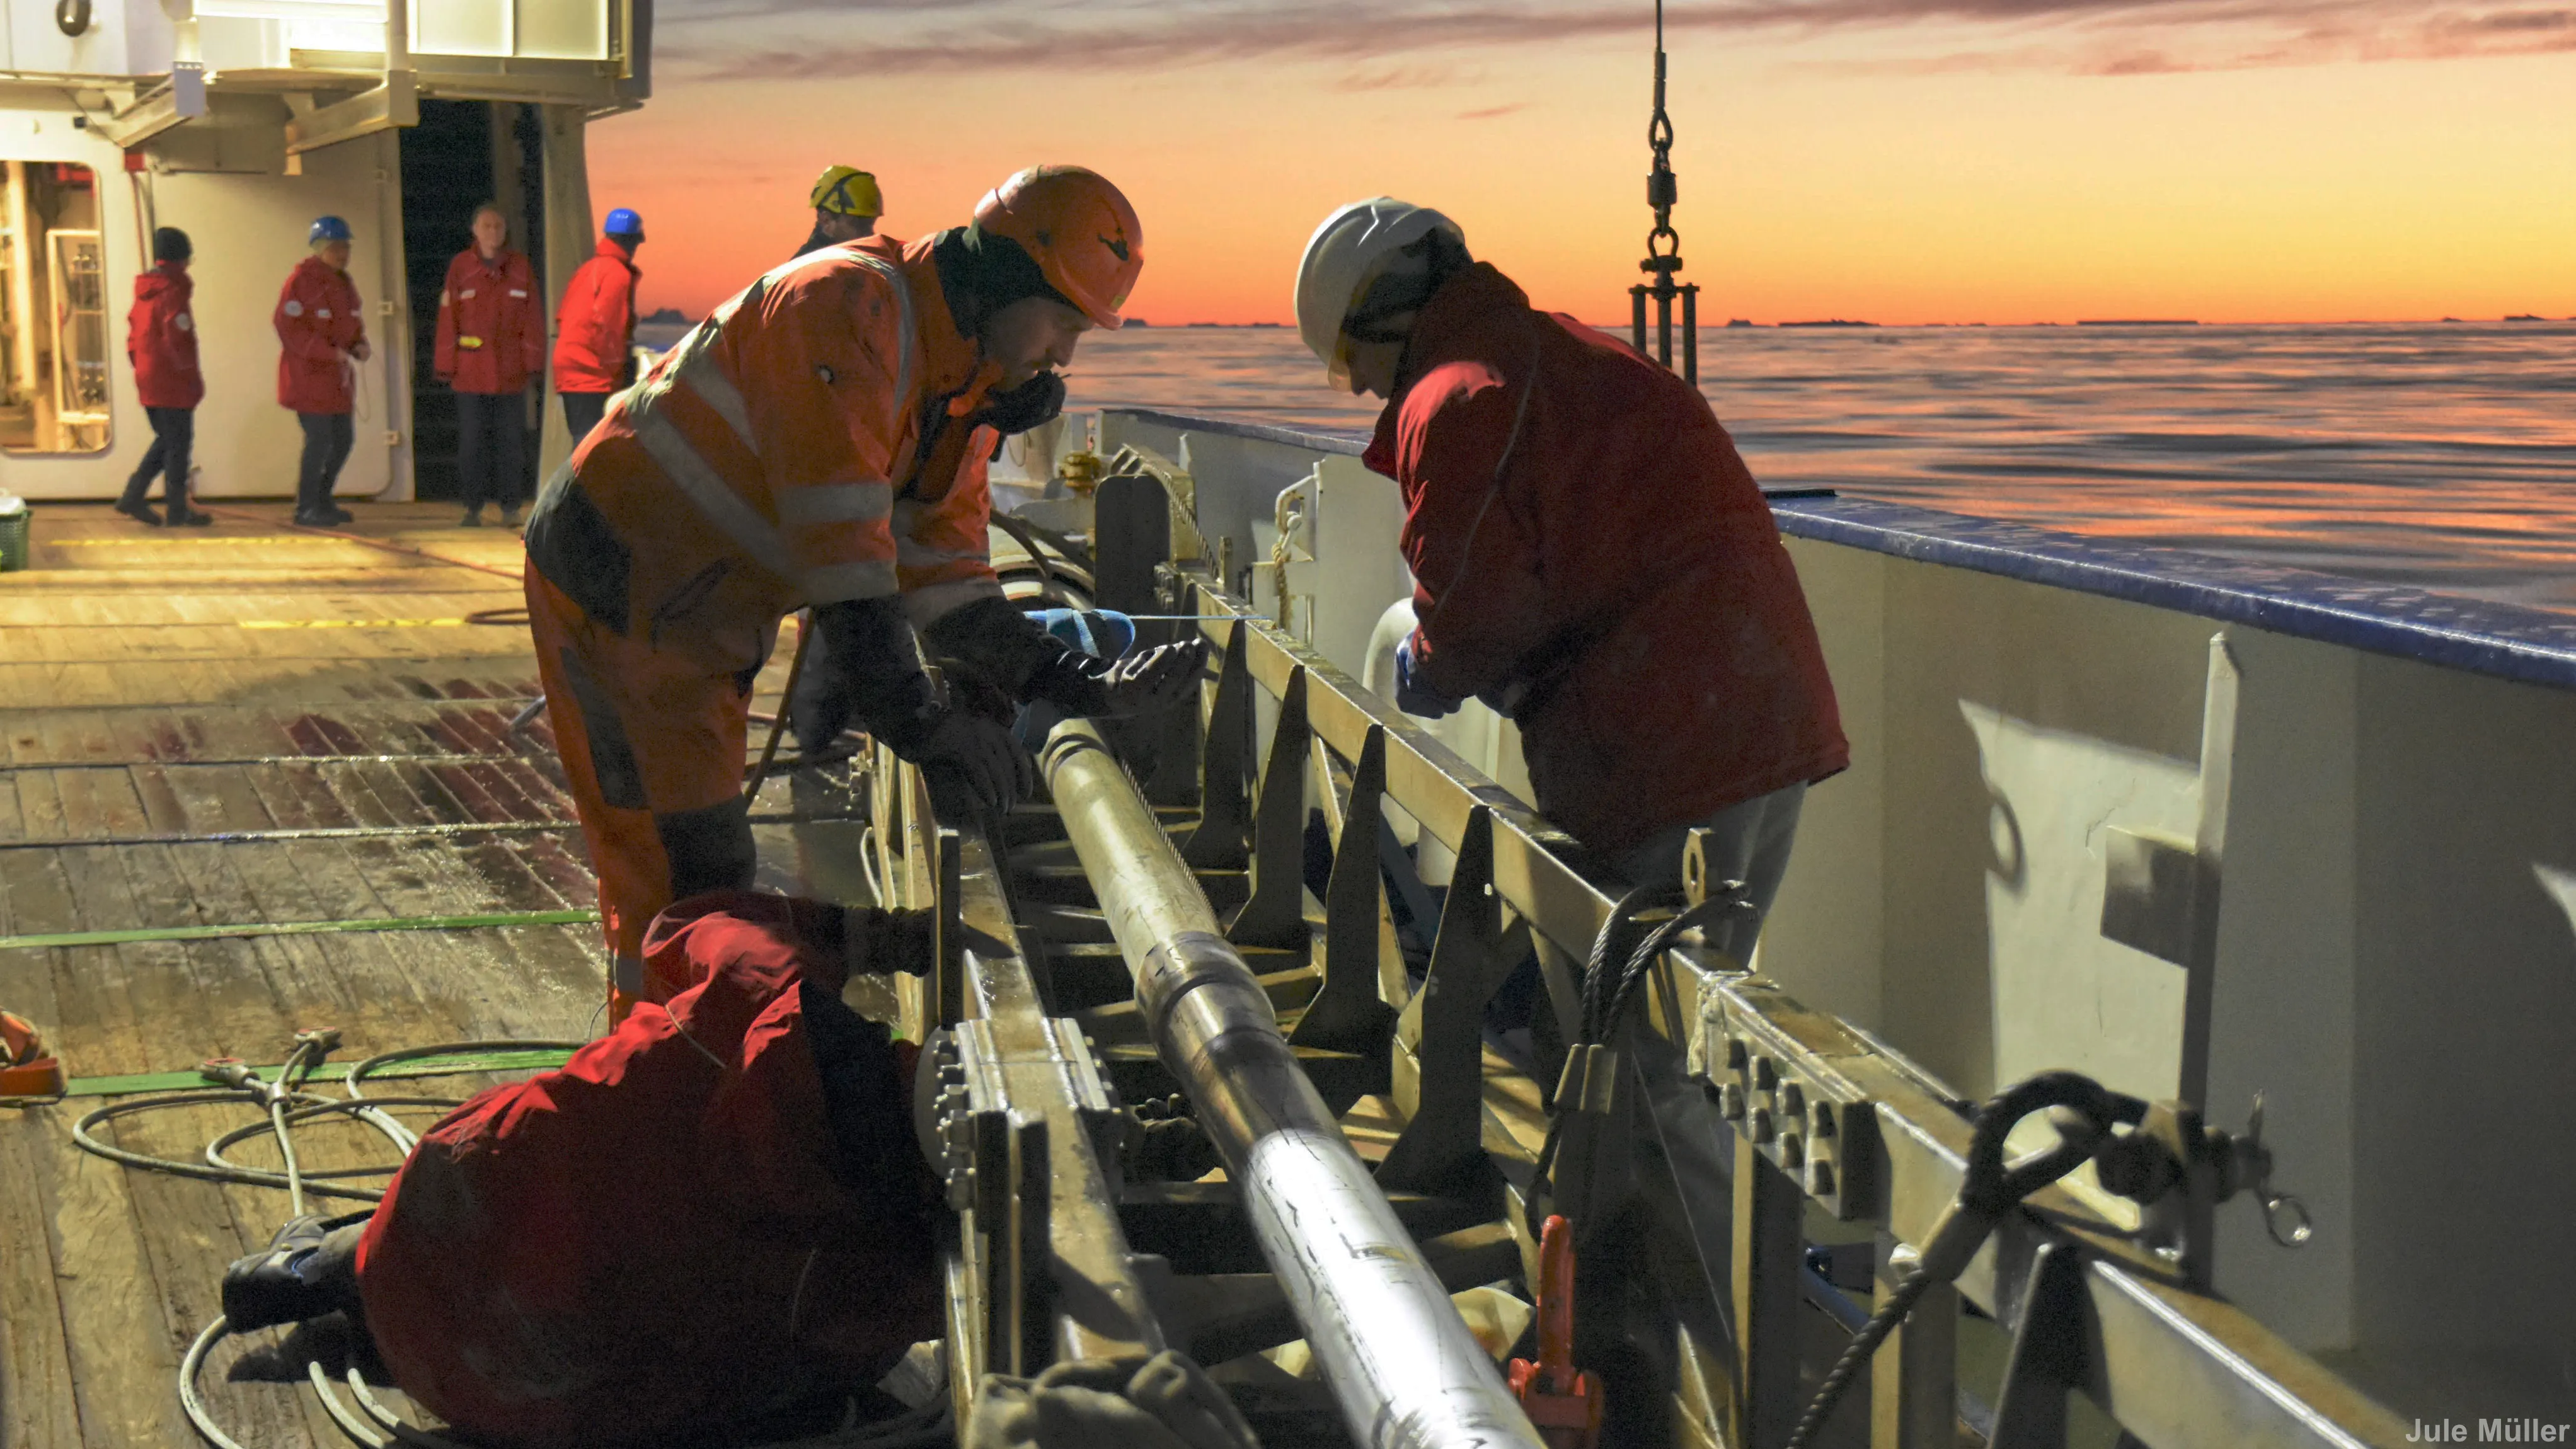 Three people working with what looks like a steel pipe in a metal support, on the deck of a ship at sunset.